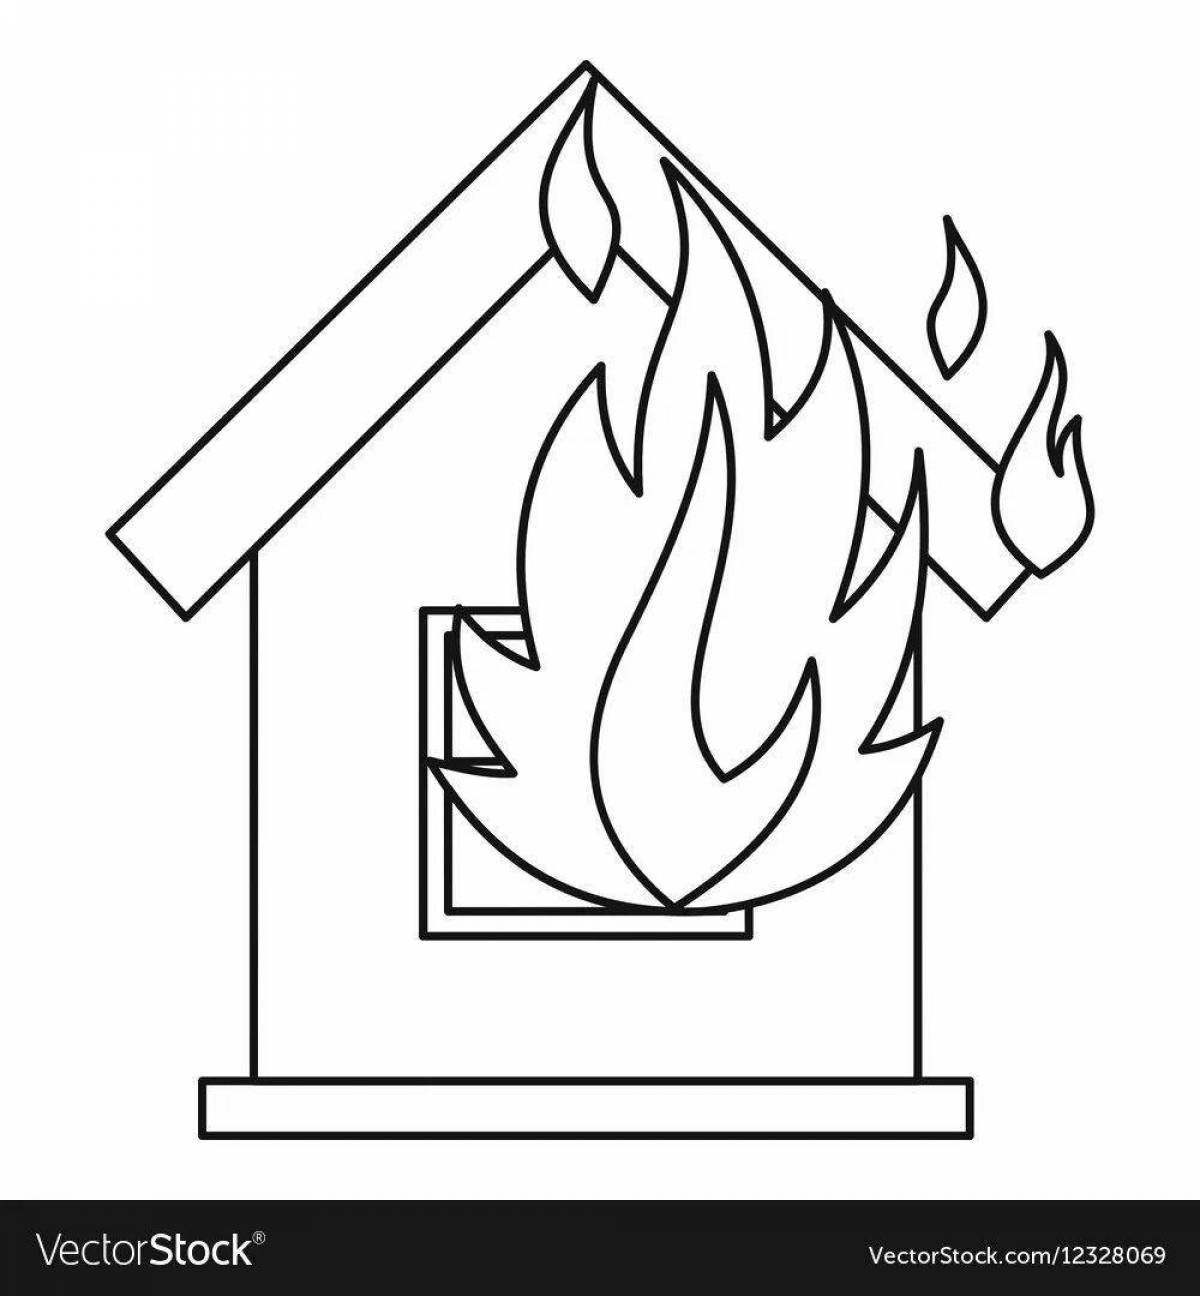 Great burning house coloring book for kids